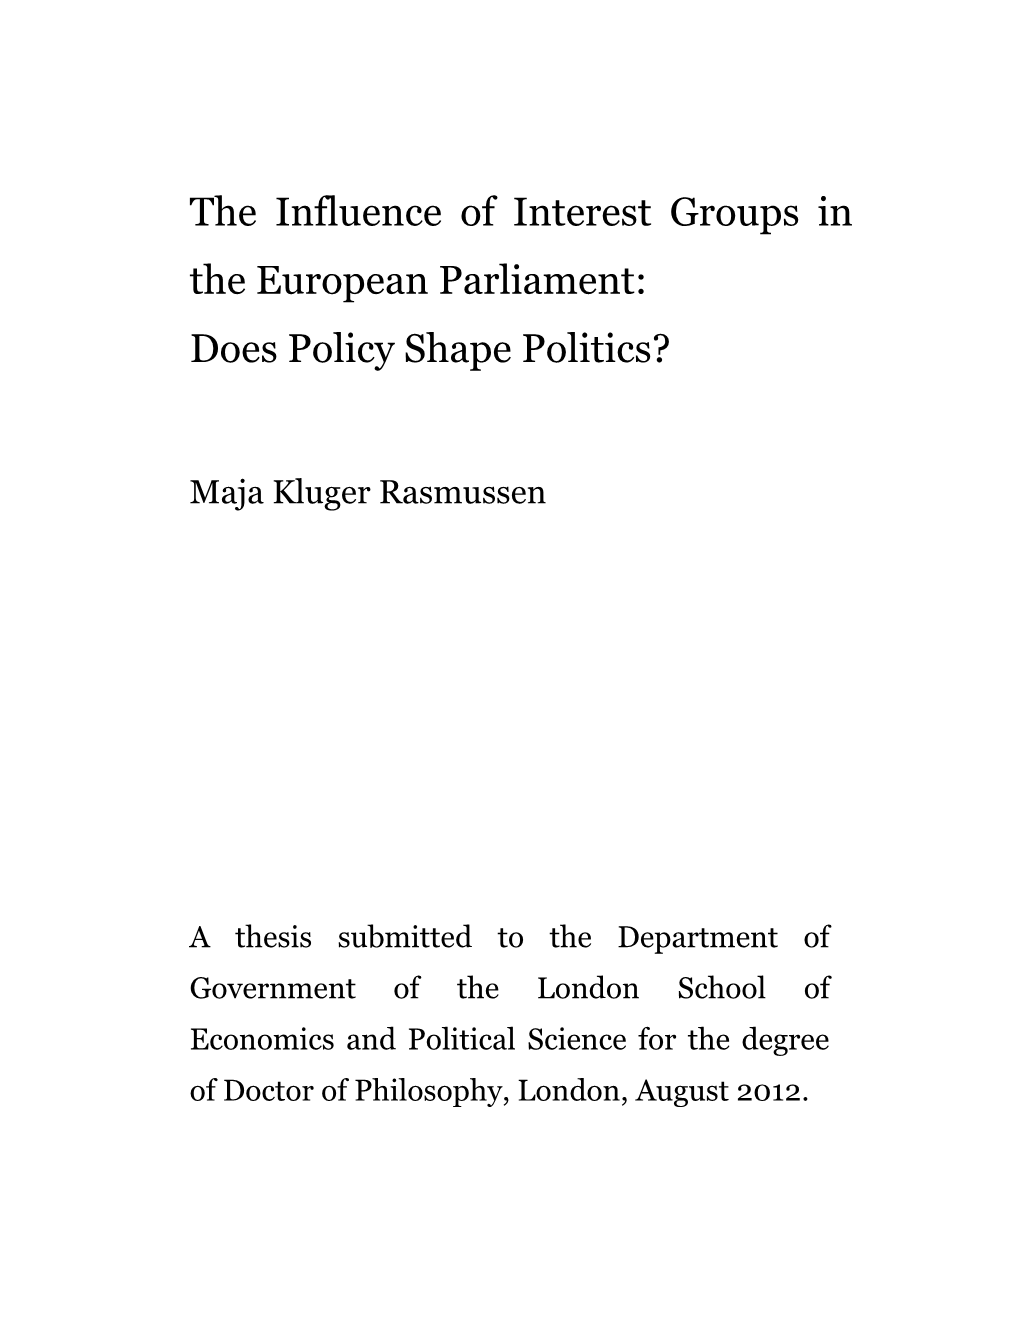 The Influence of Interest Groups in the European Parliament: Does Policy Shape Politics?